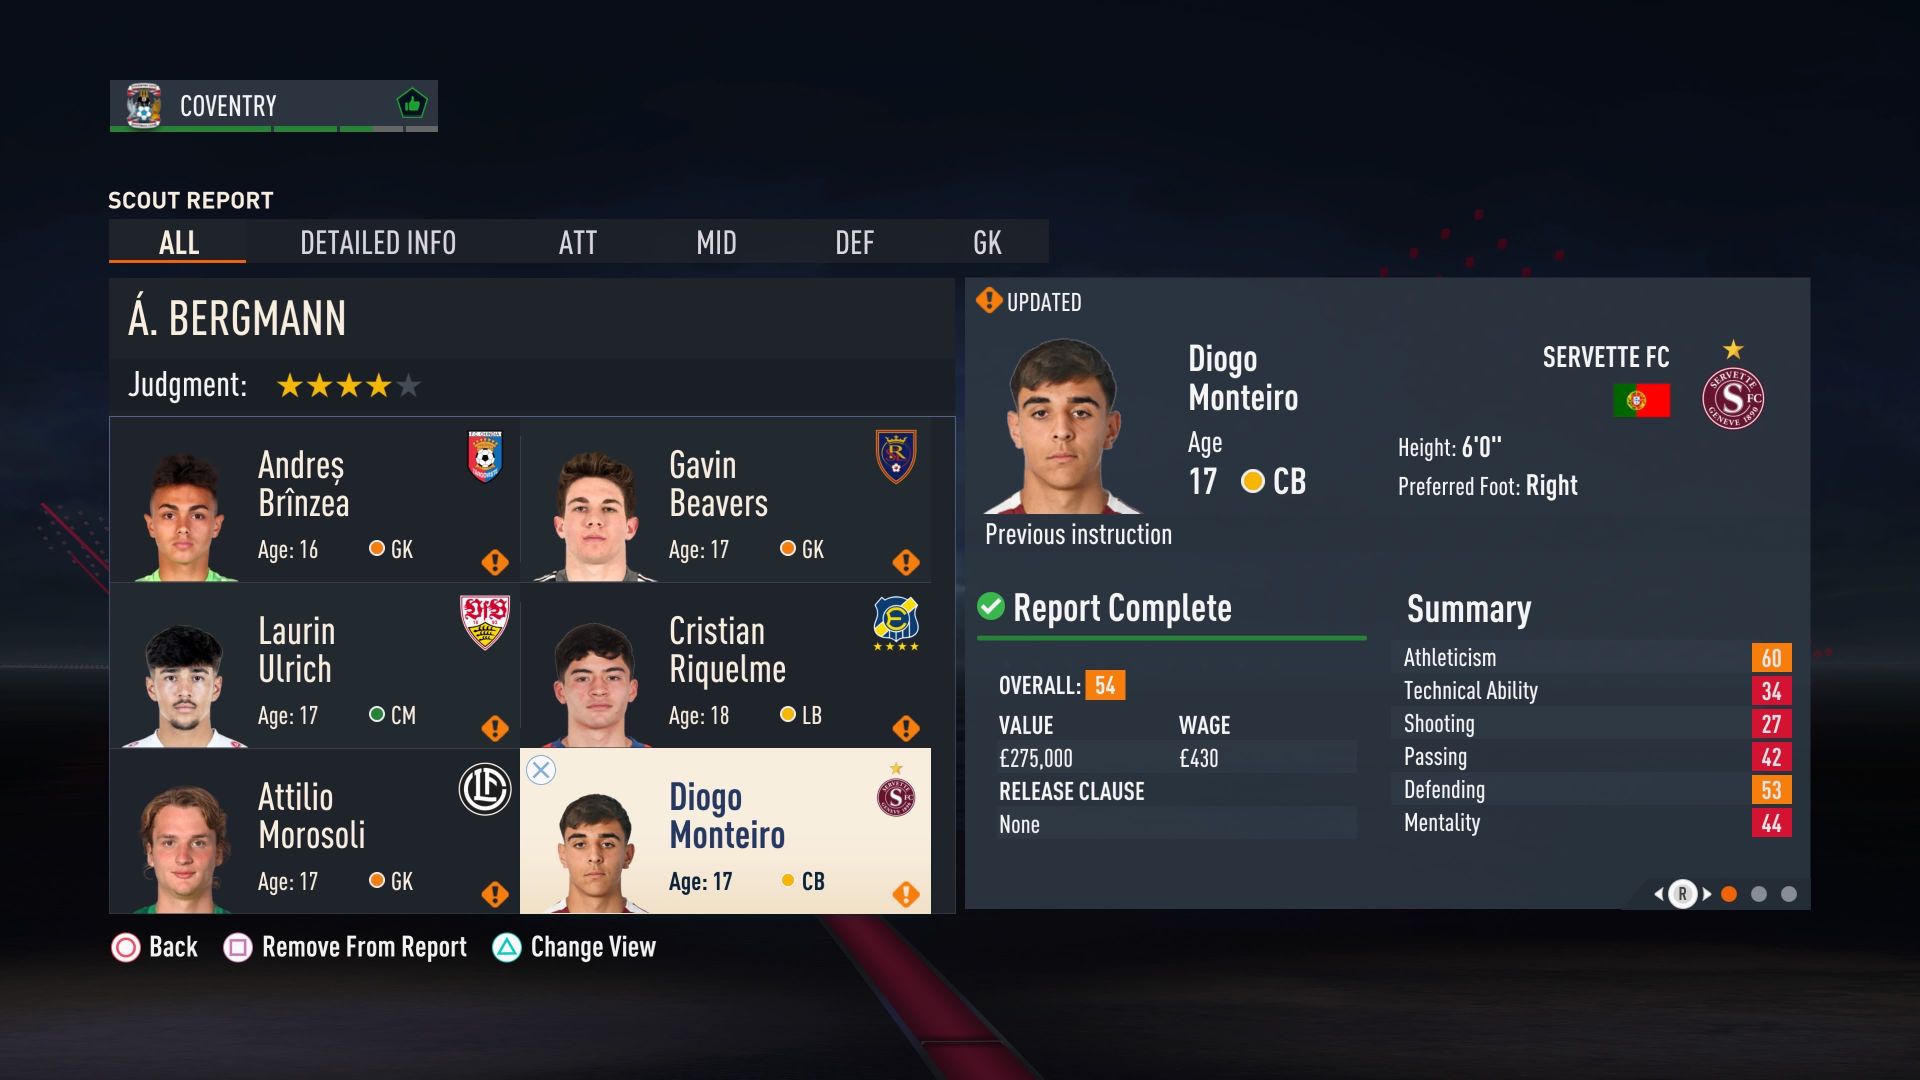 FIFA 23 Wonderkids: Best Young Players in Career Mode